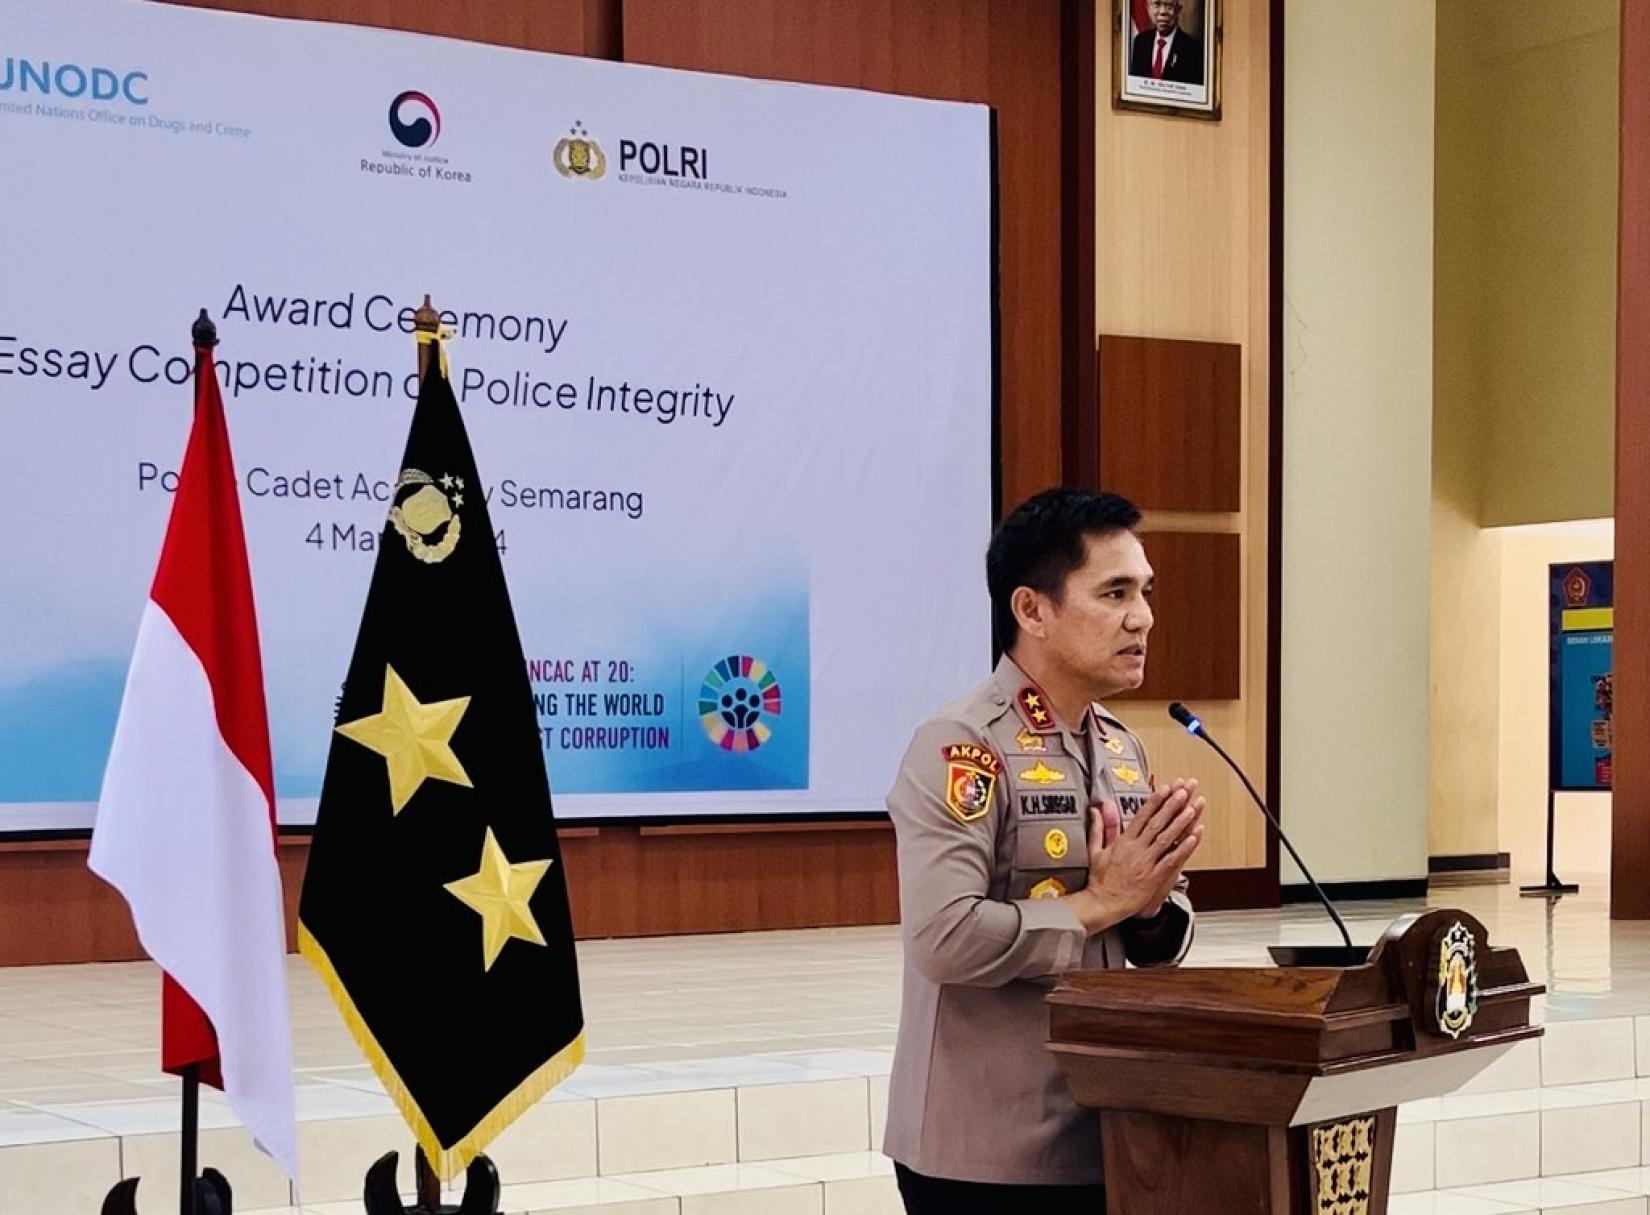 Inspector General of Police Krisno H. Siregar,S.I.K., M.H., Governor of the Police Academy gave his opening remarks on the Award Ceremony for the UNODC Essay Competition on Police Integrity